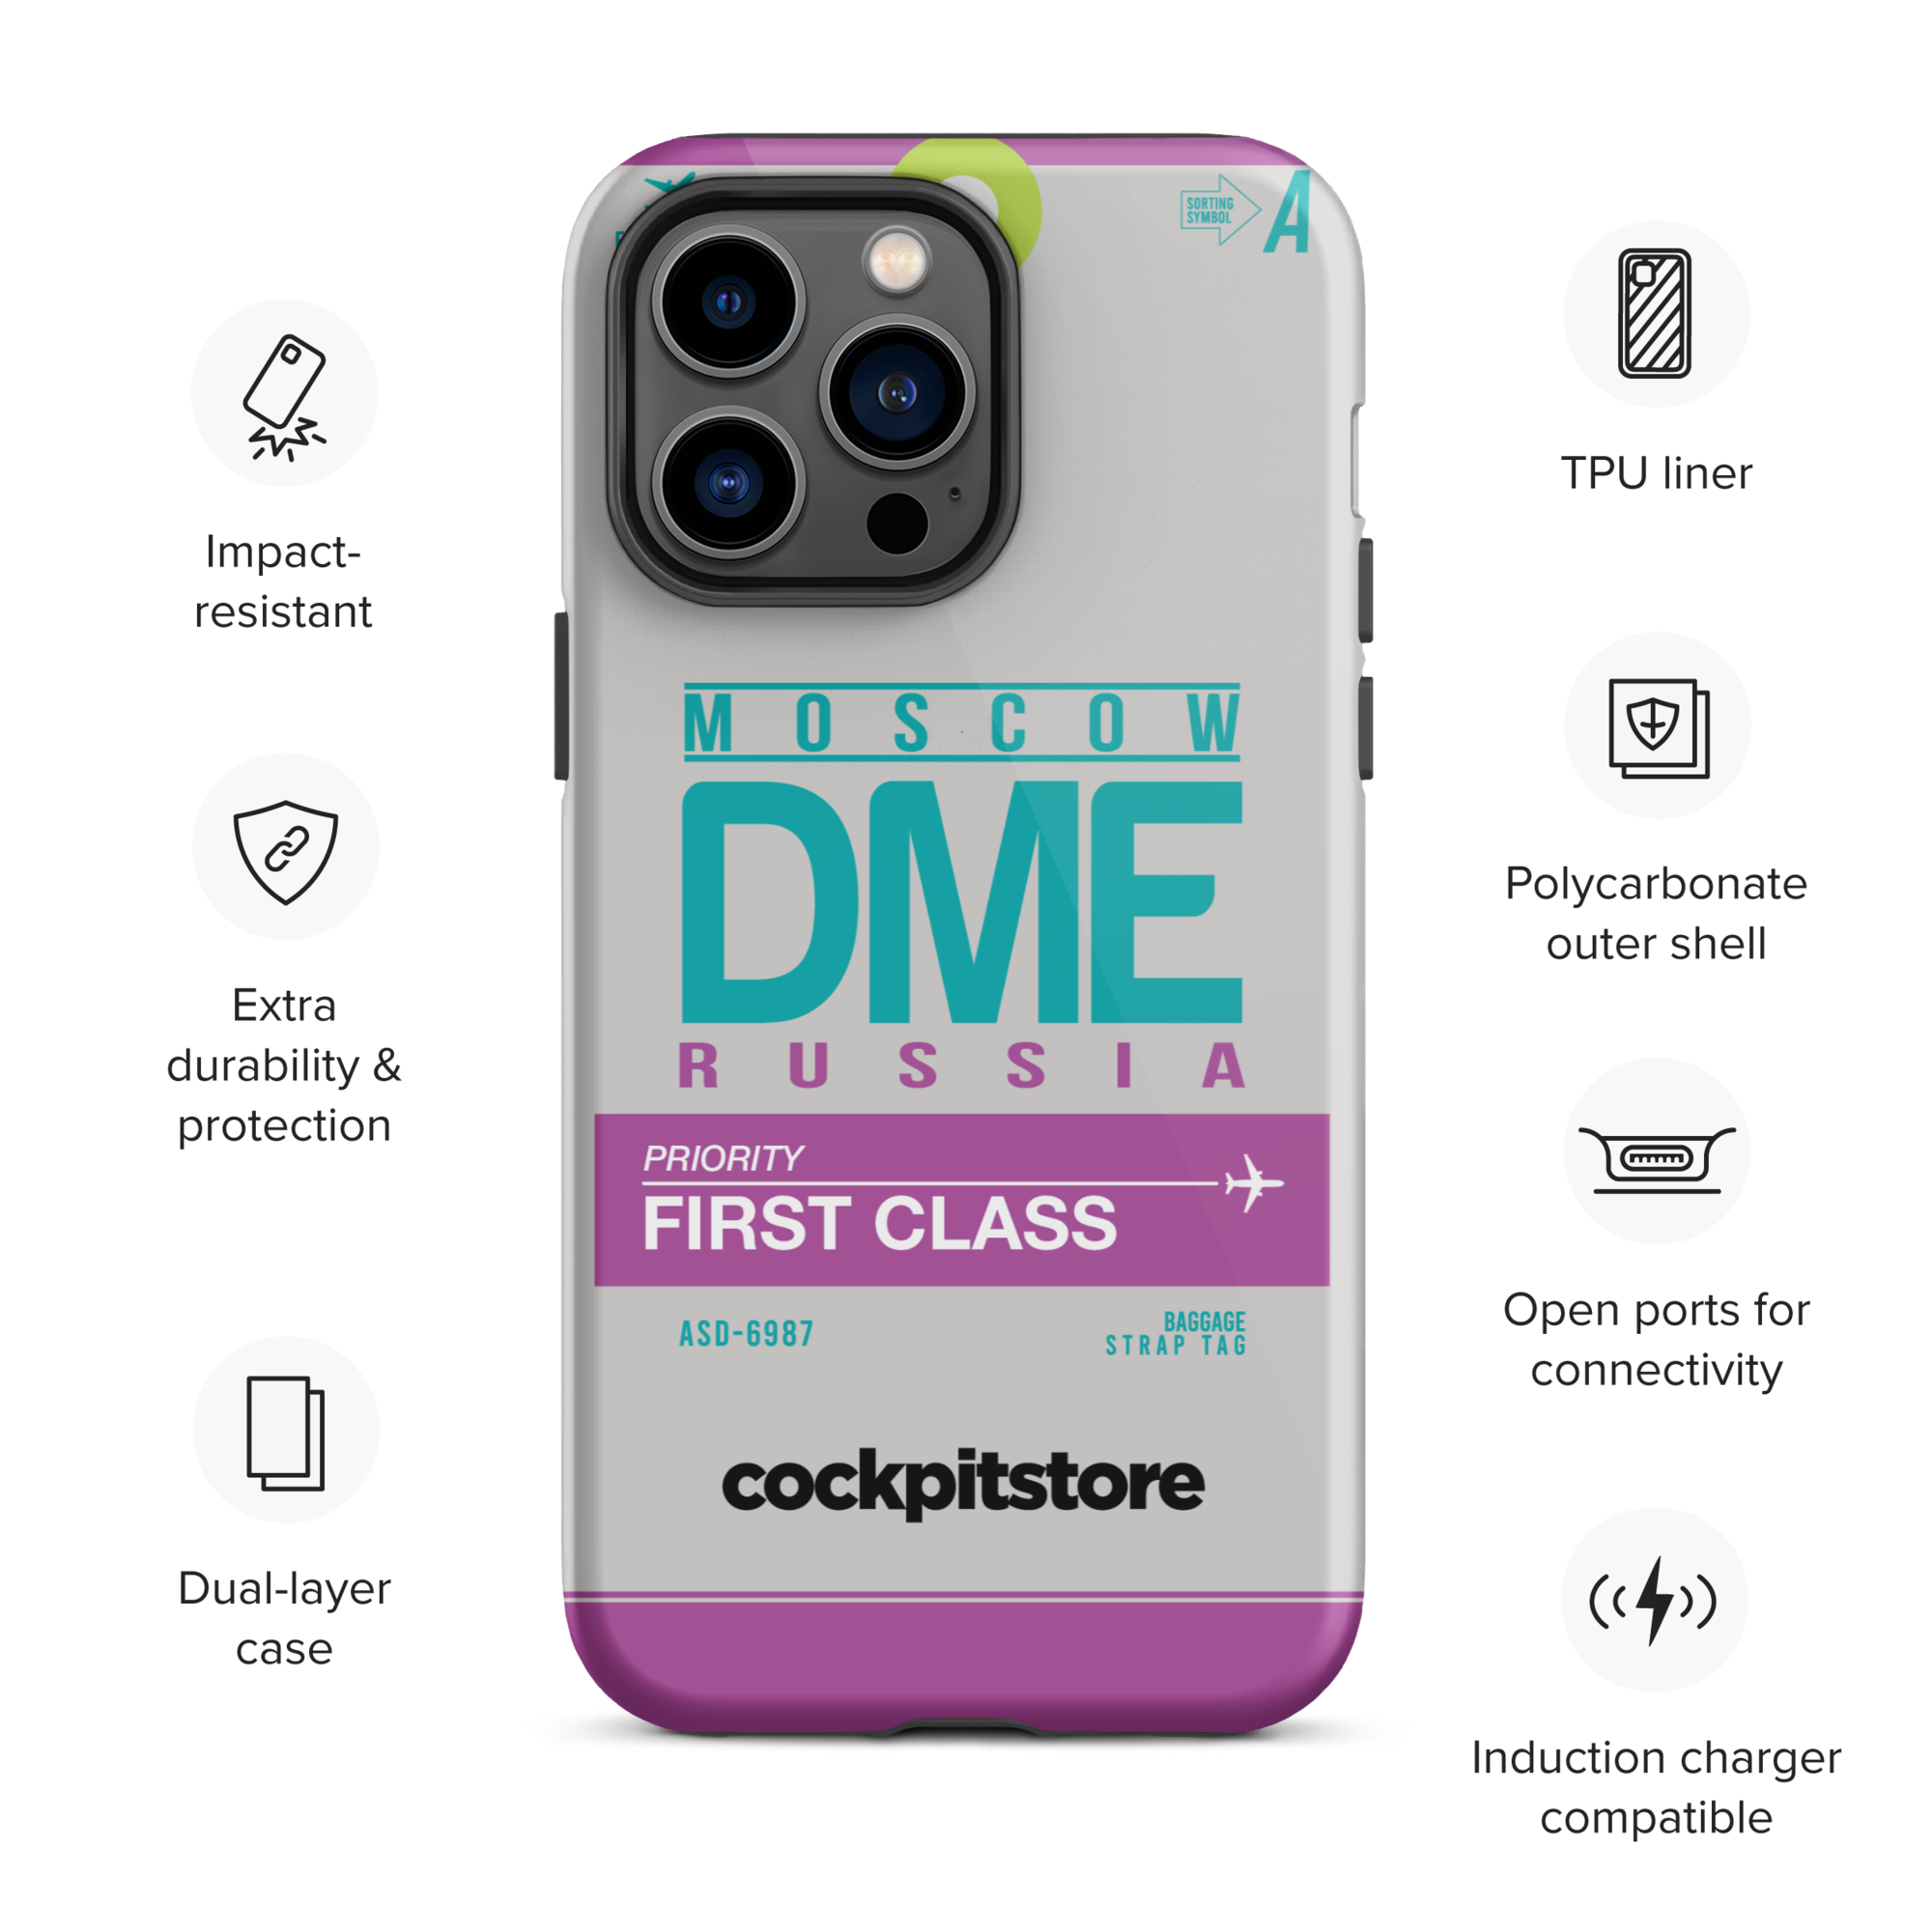 DME - Moscow iPhone Tough Case mit Flughafencode